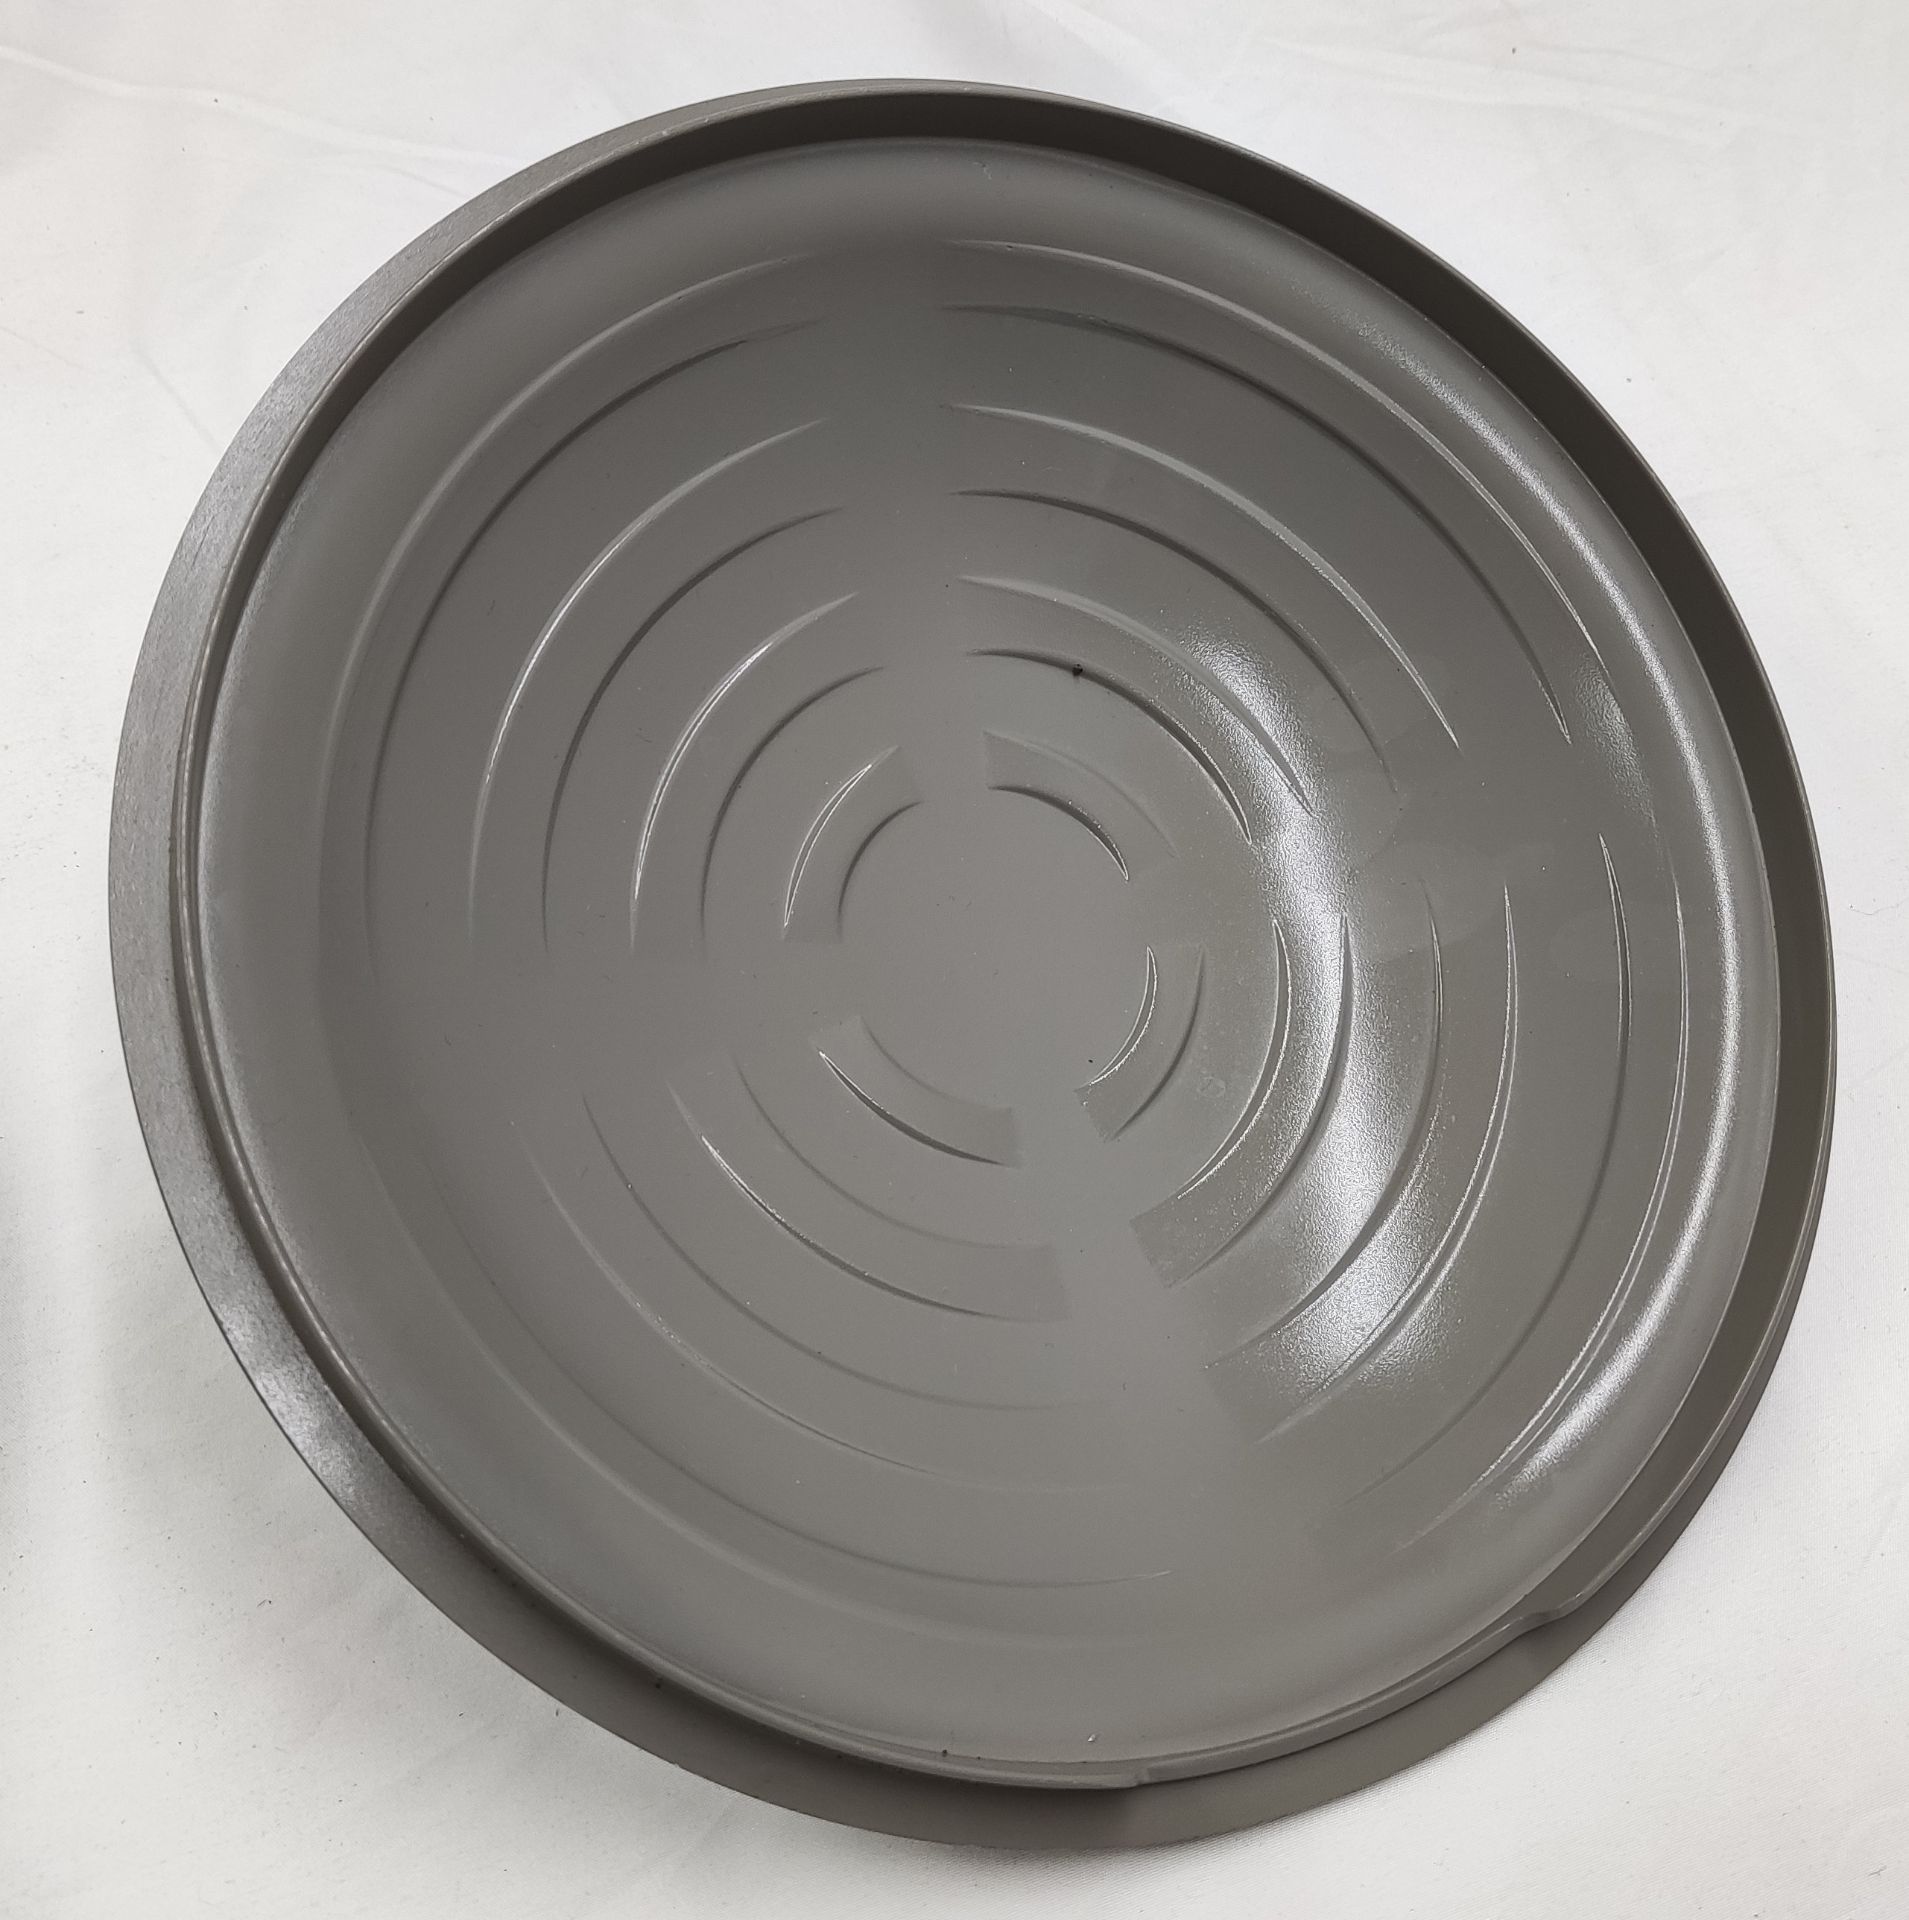 1 x OUR PLACE Our Place Cast Iron Always Pan In Charcoal - RRP £135 - Ref: 7260391/HOC165/HC6 - - Image 11 of 17